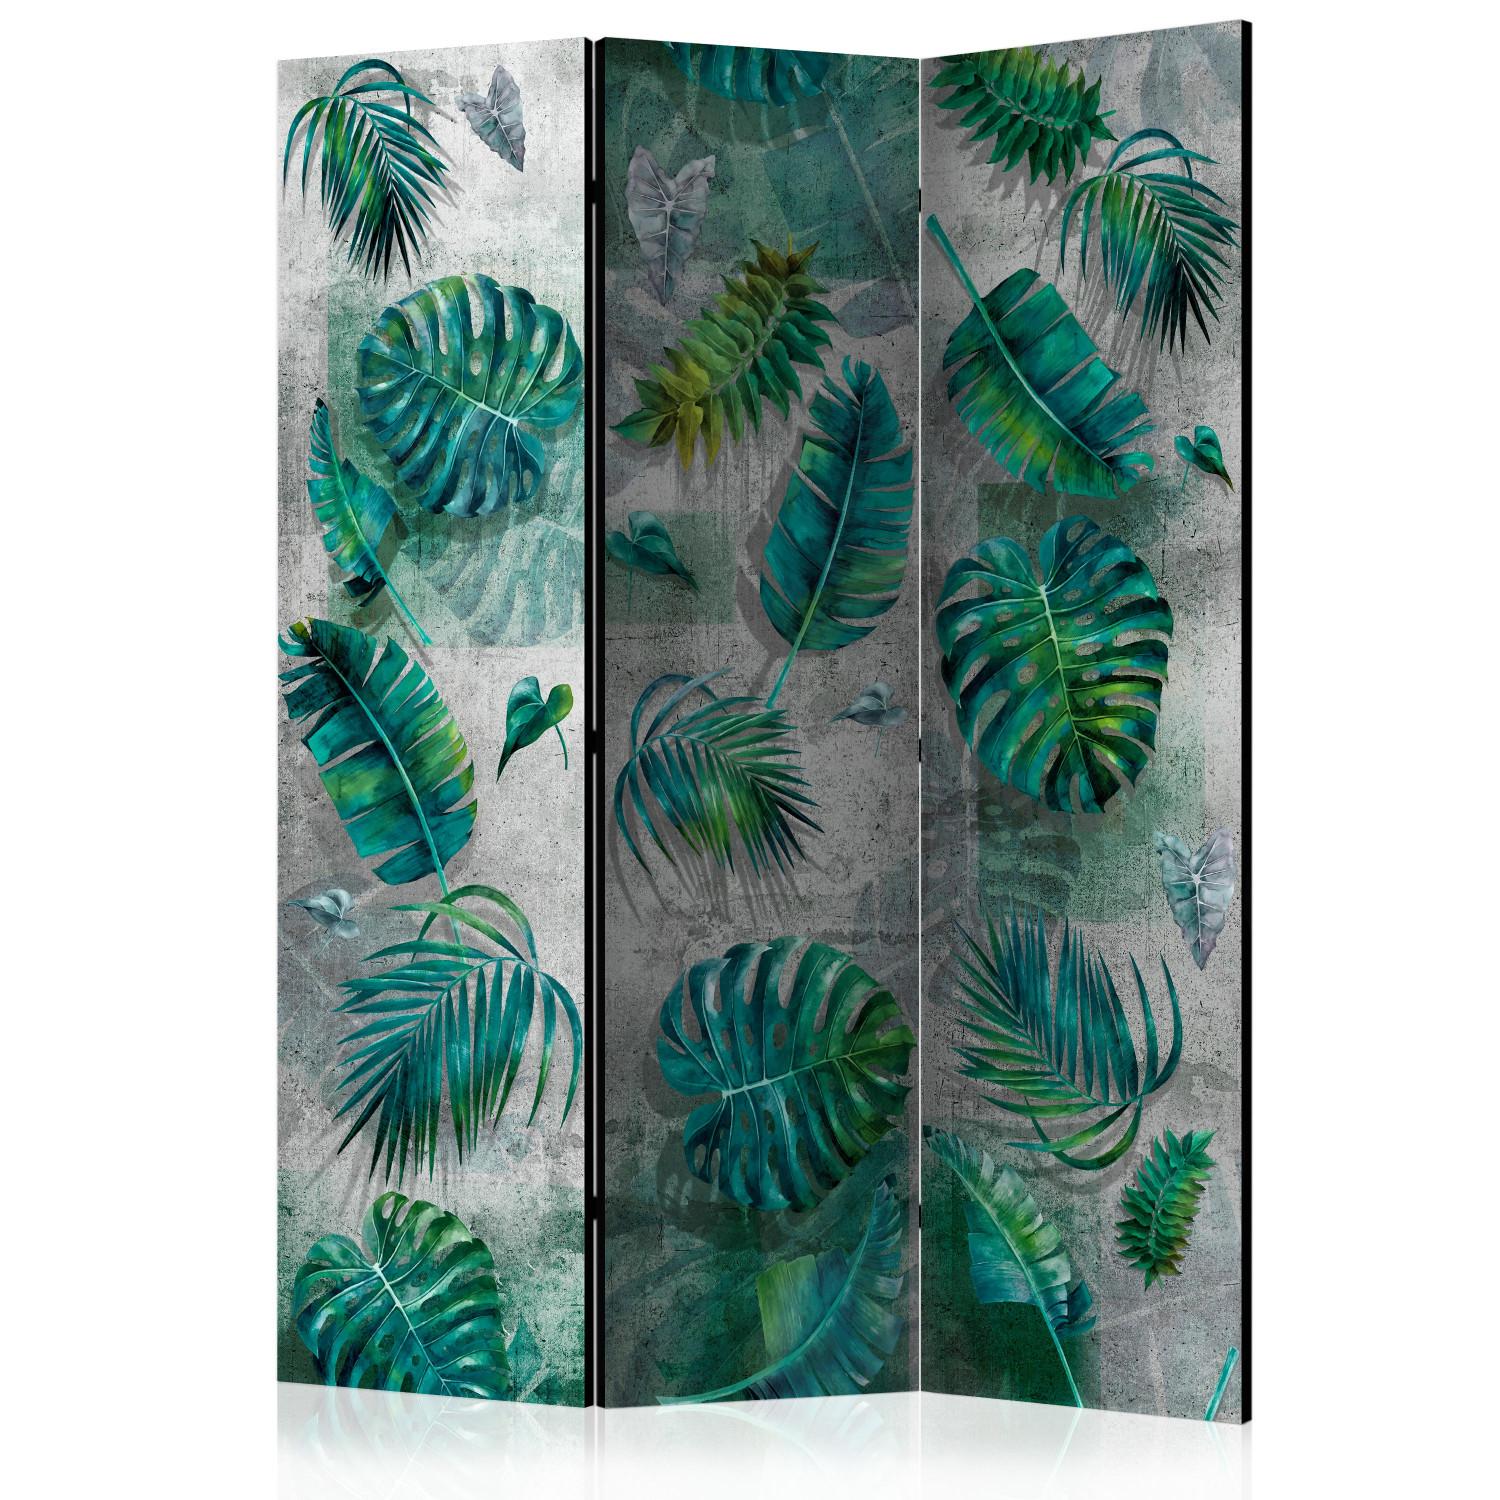 Room Divider Modernist Jungle (3-piece) - green leaves on a gray background